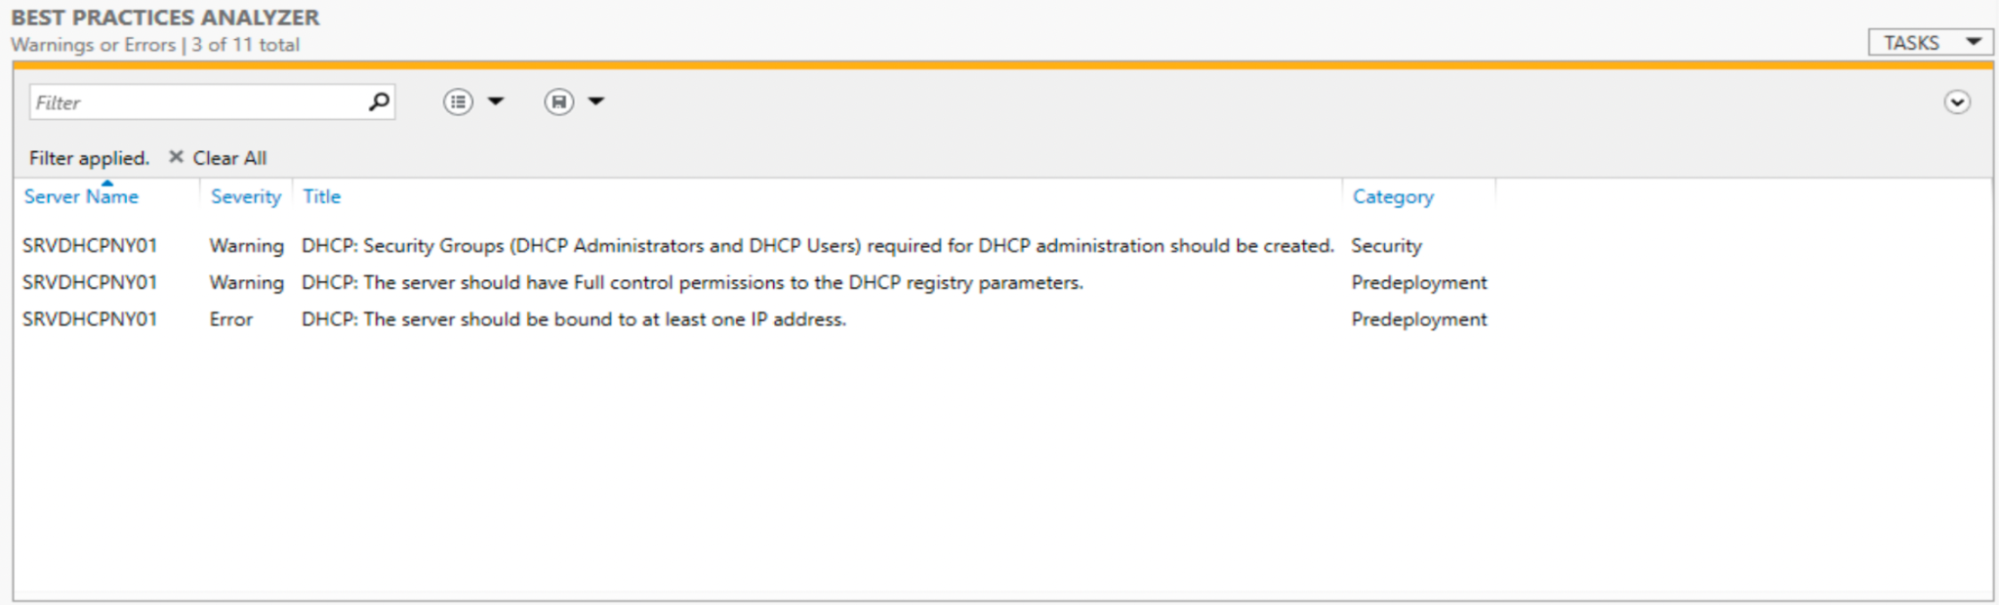 BPA result with the DHCP role installed on a brand-new server